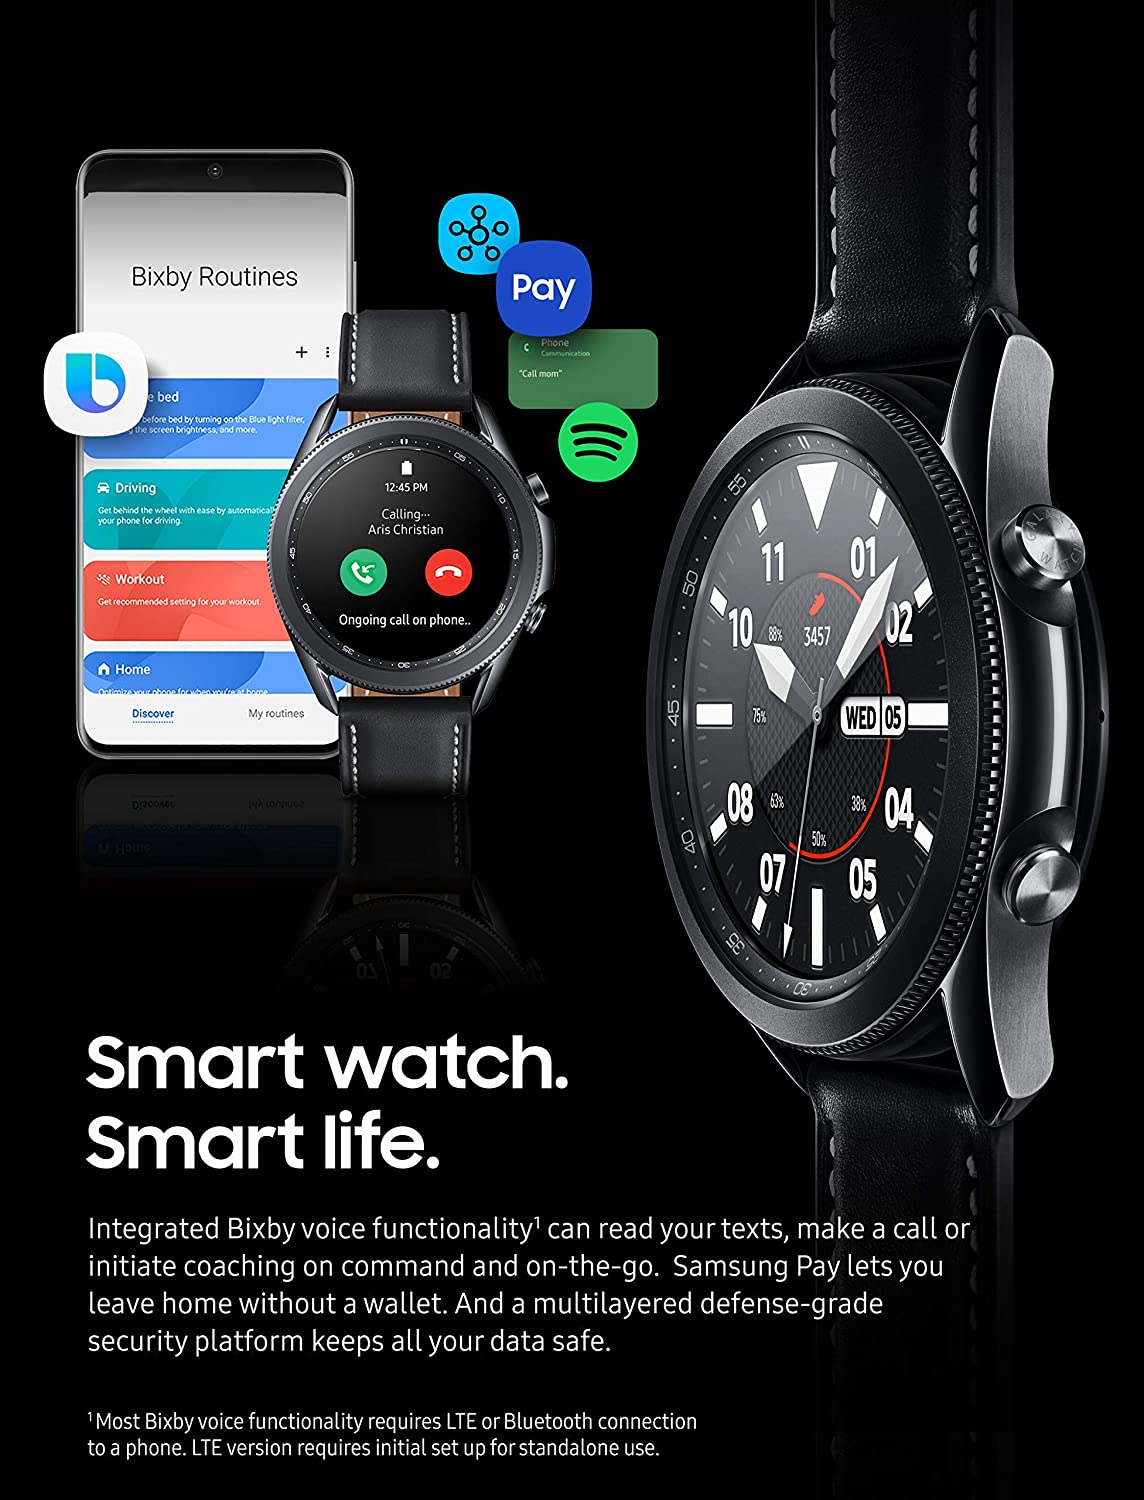 Samsung Galaxy Watch 3 (45mm, GPS, Bluetooth) Smart Watch with Advanced Health Monitoring, Fitness Tracking , and Long Lasting Battery - Mystic Black (US Version) (Renewed)